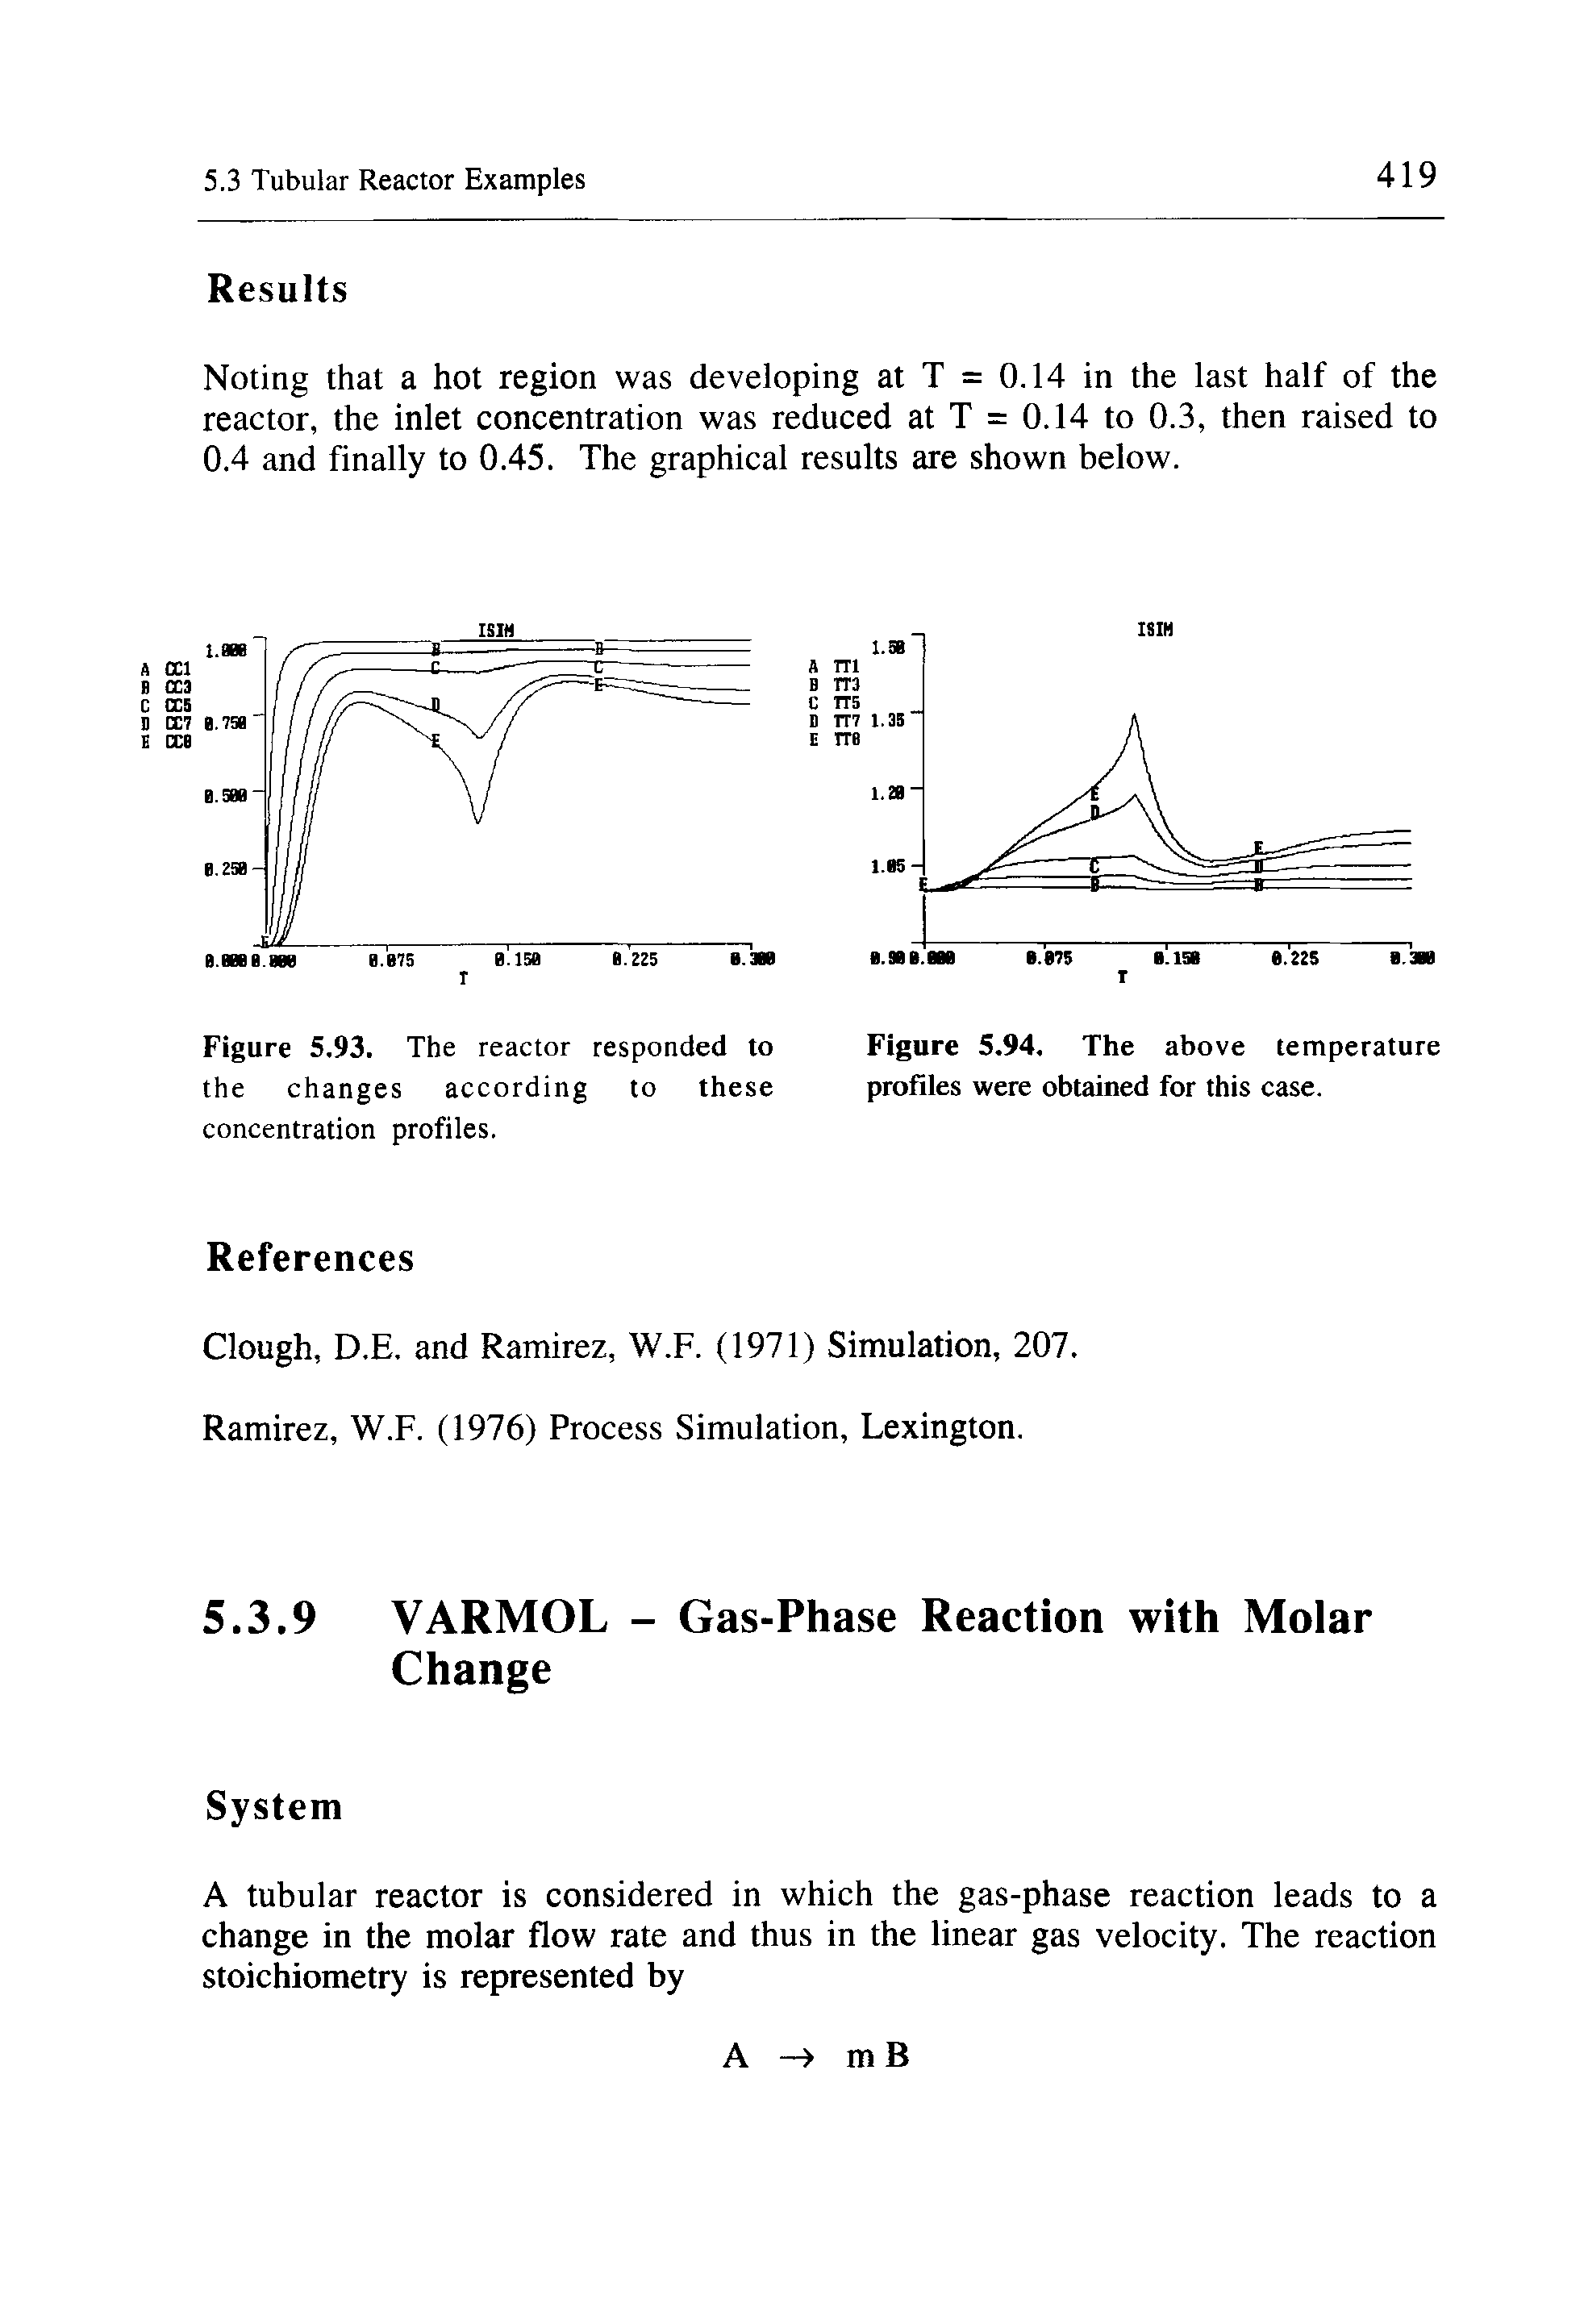 Figure 5.93. The reactor responded to the changes according to these concentration profiles.